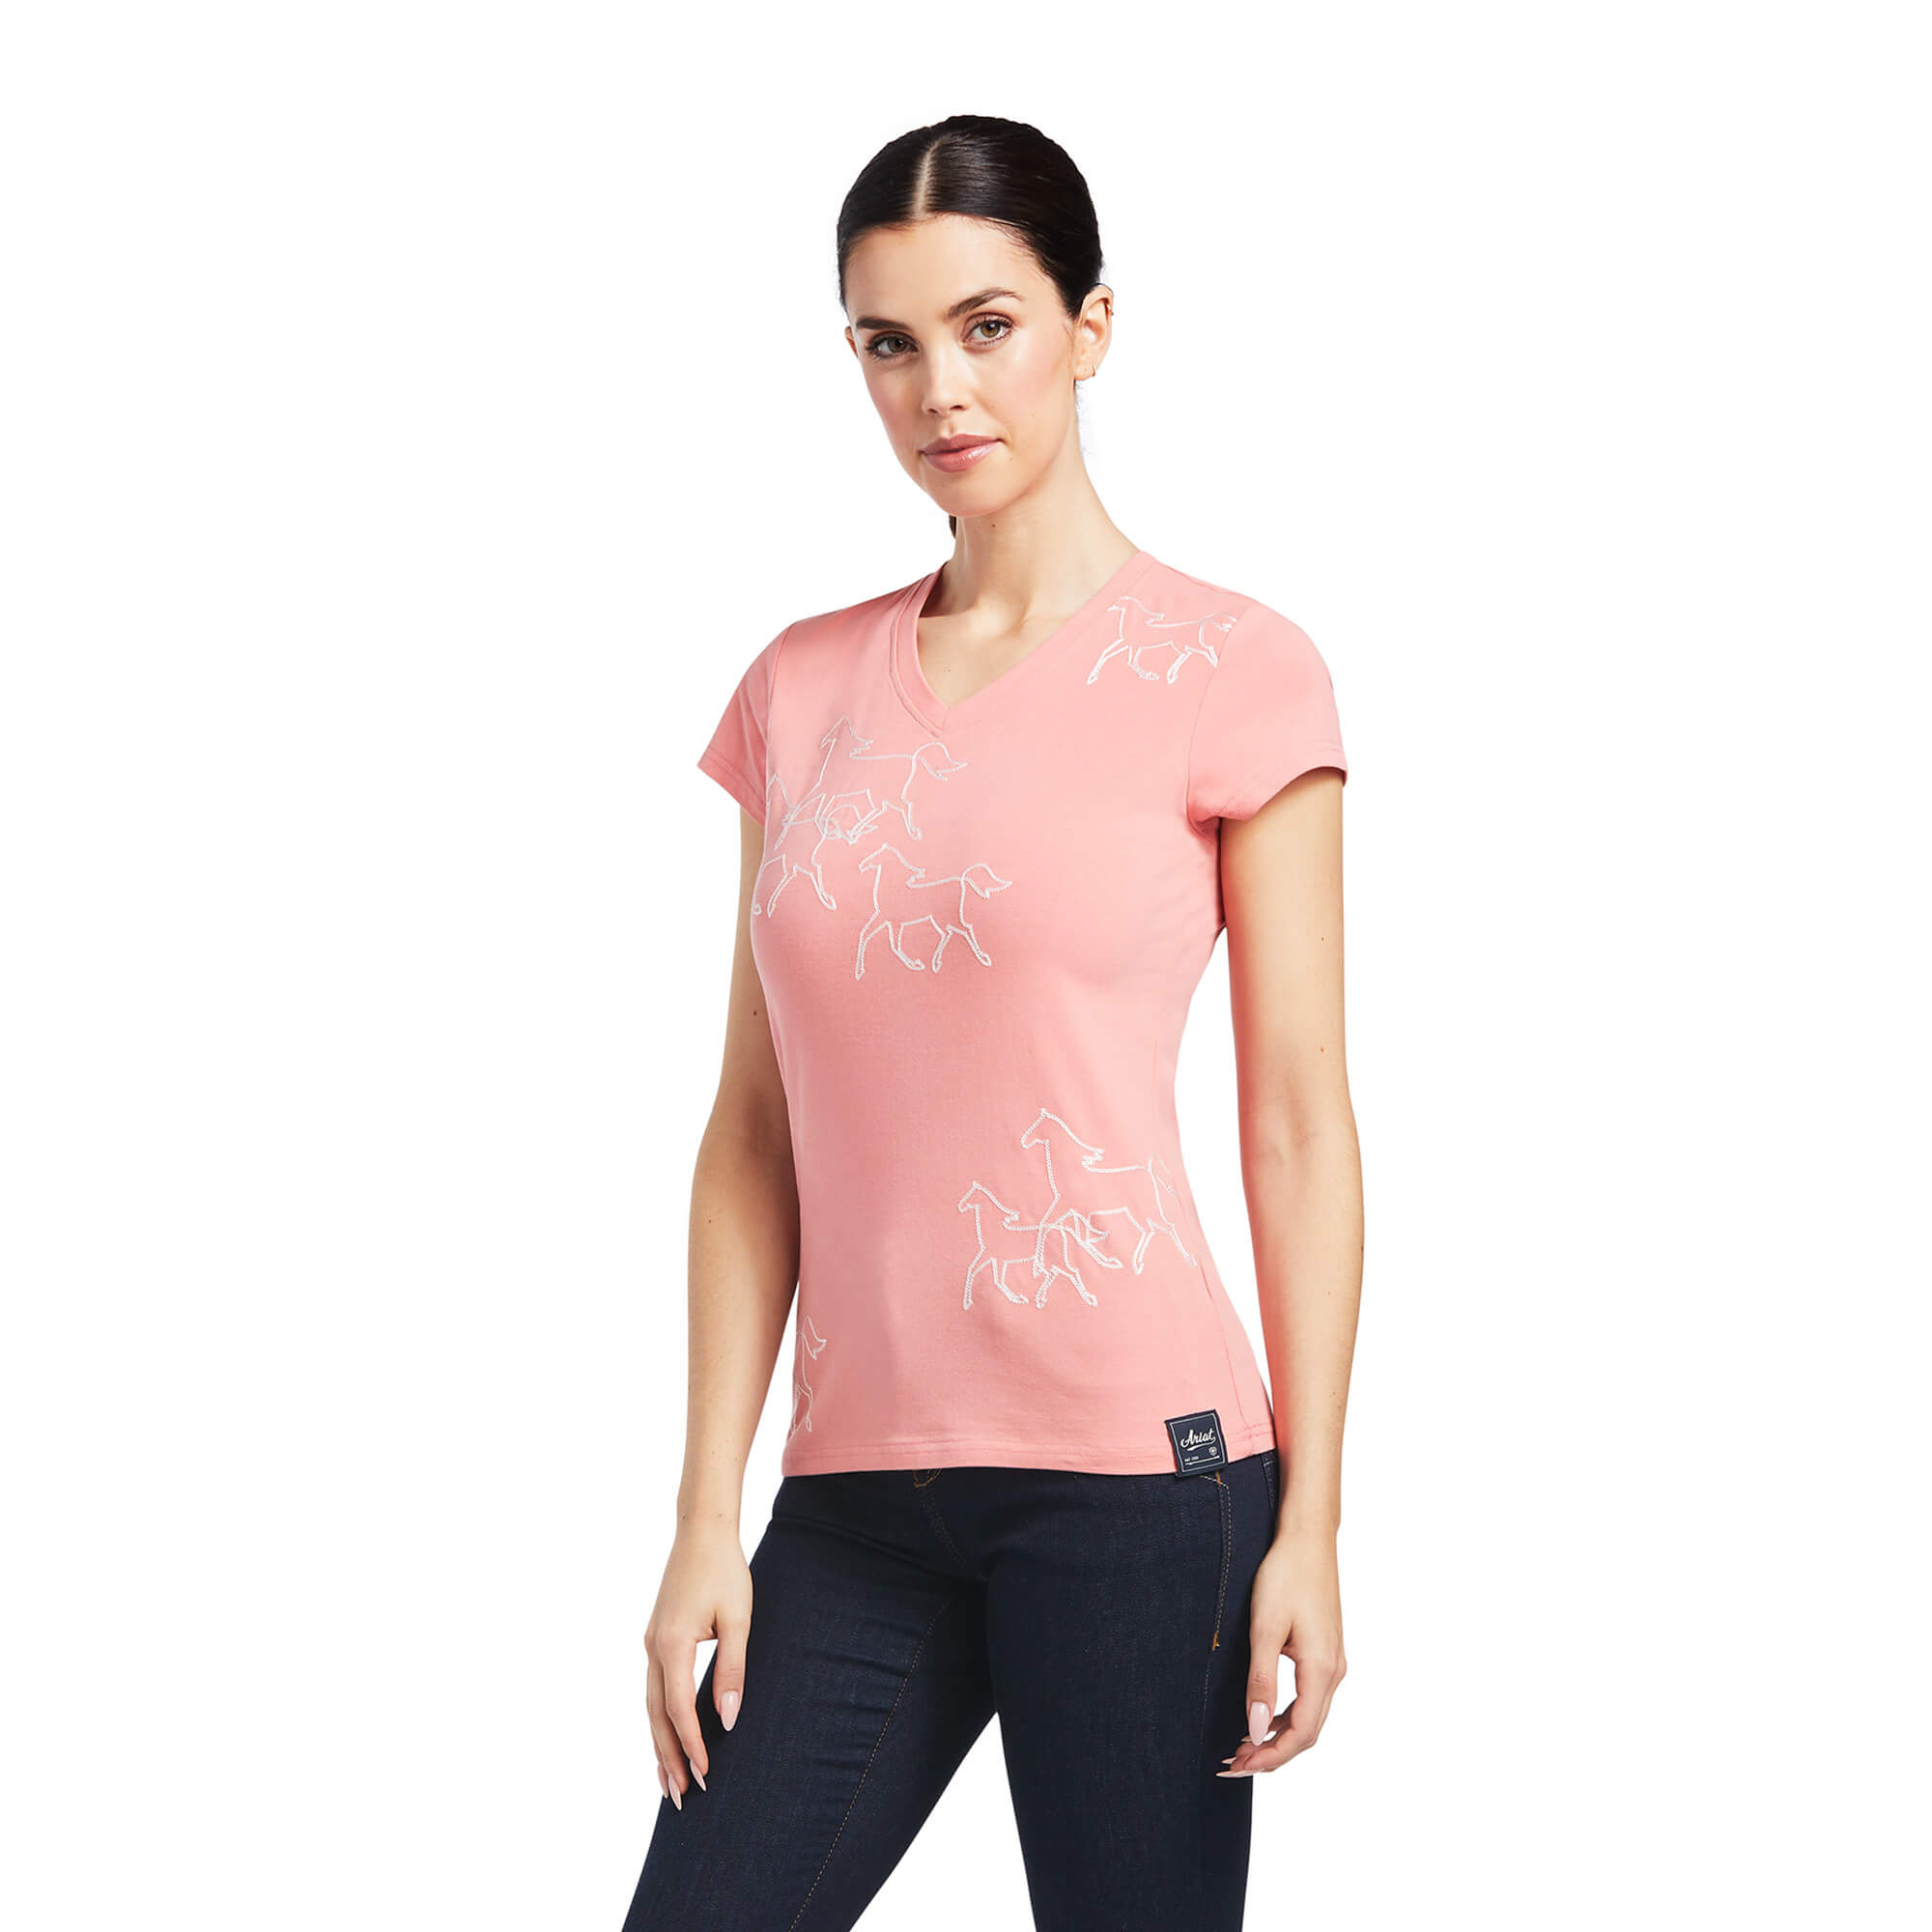 50% OFF ARIAT Trot Line T-Shirt - Large